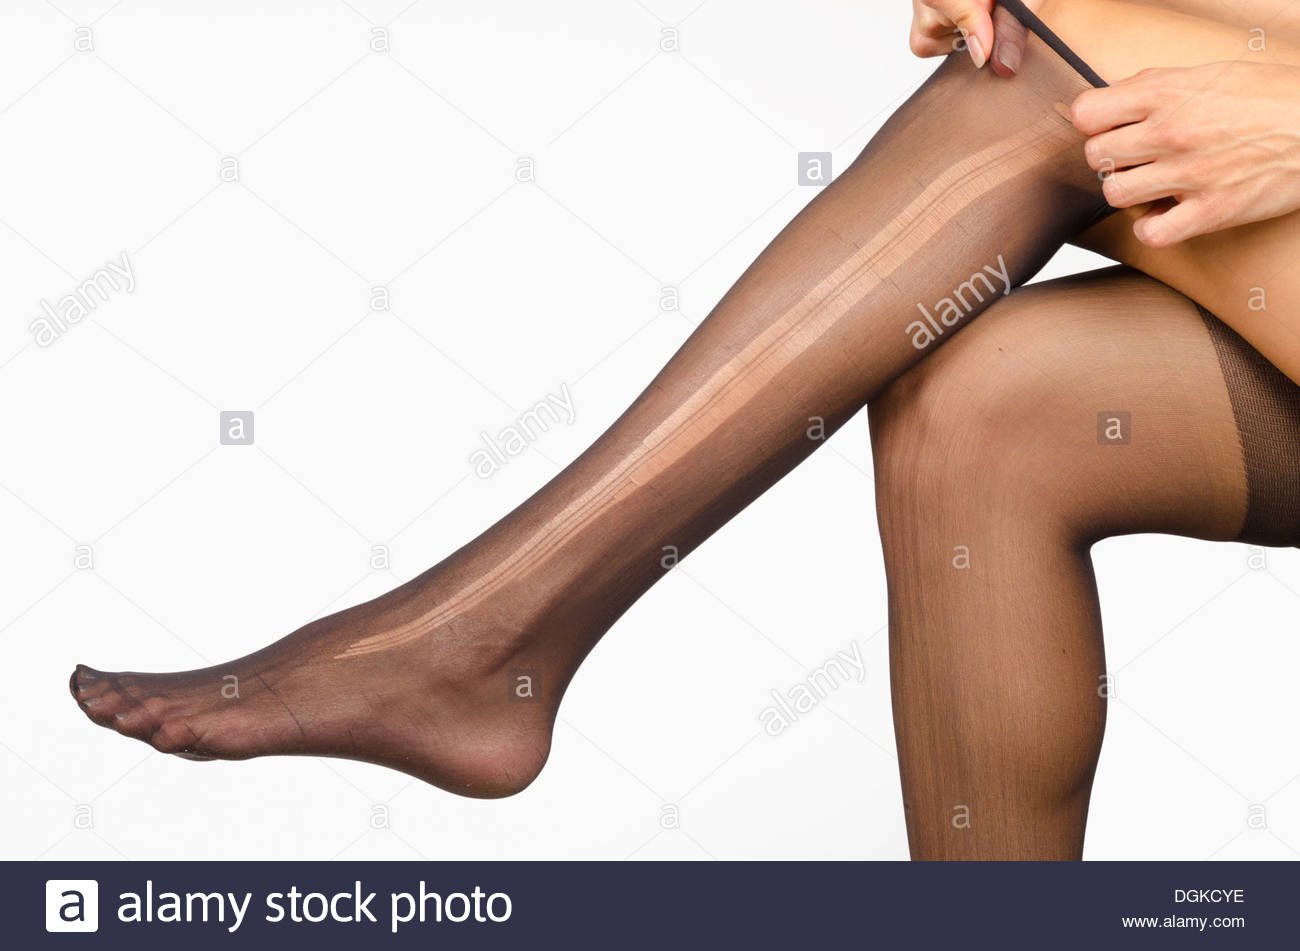 Artistic ripping pantyhose